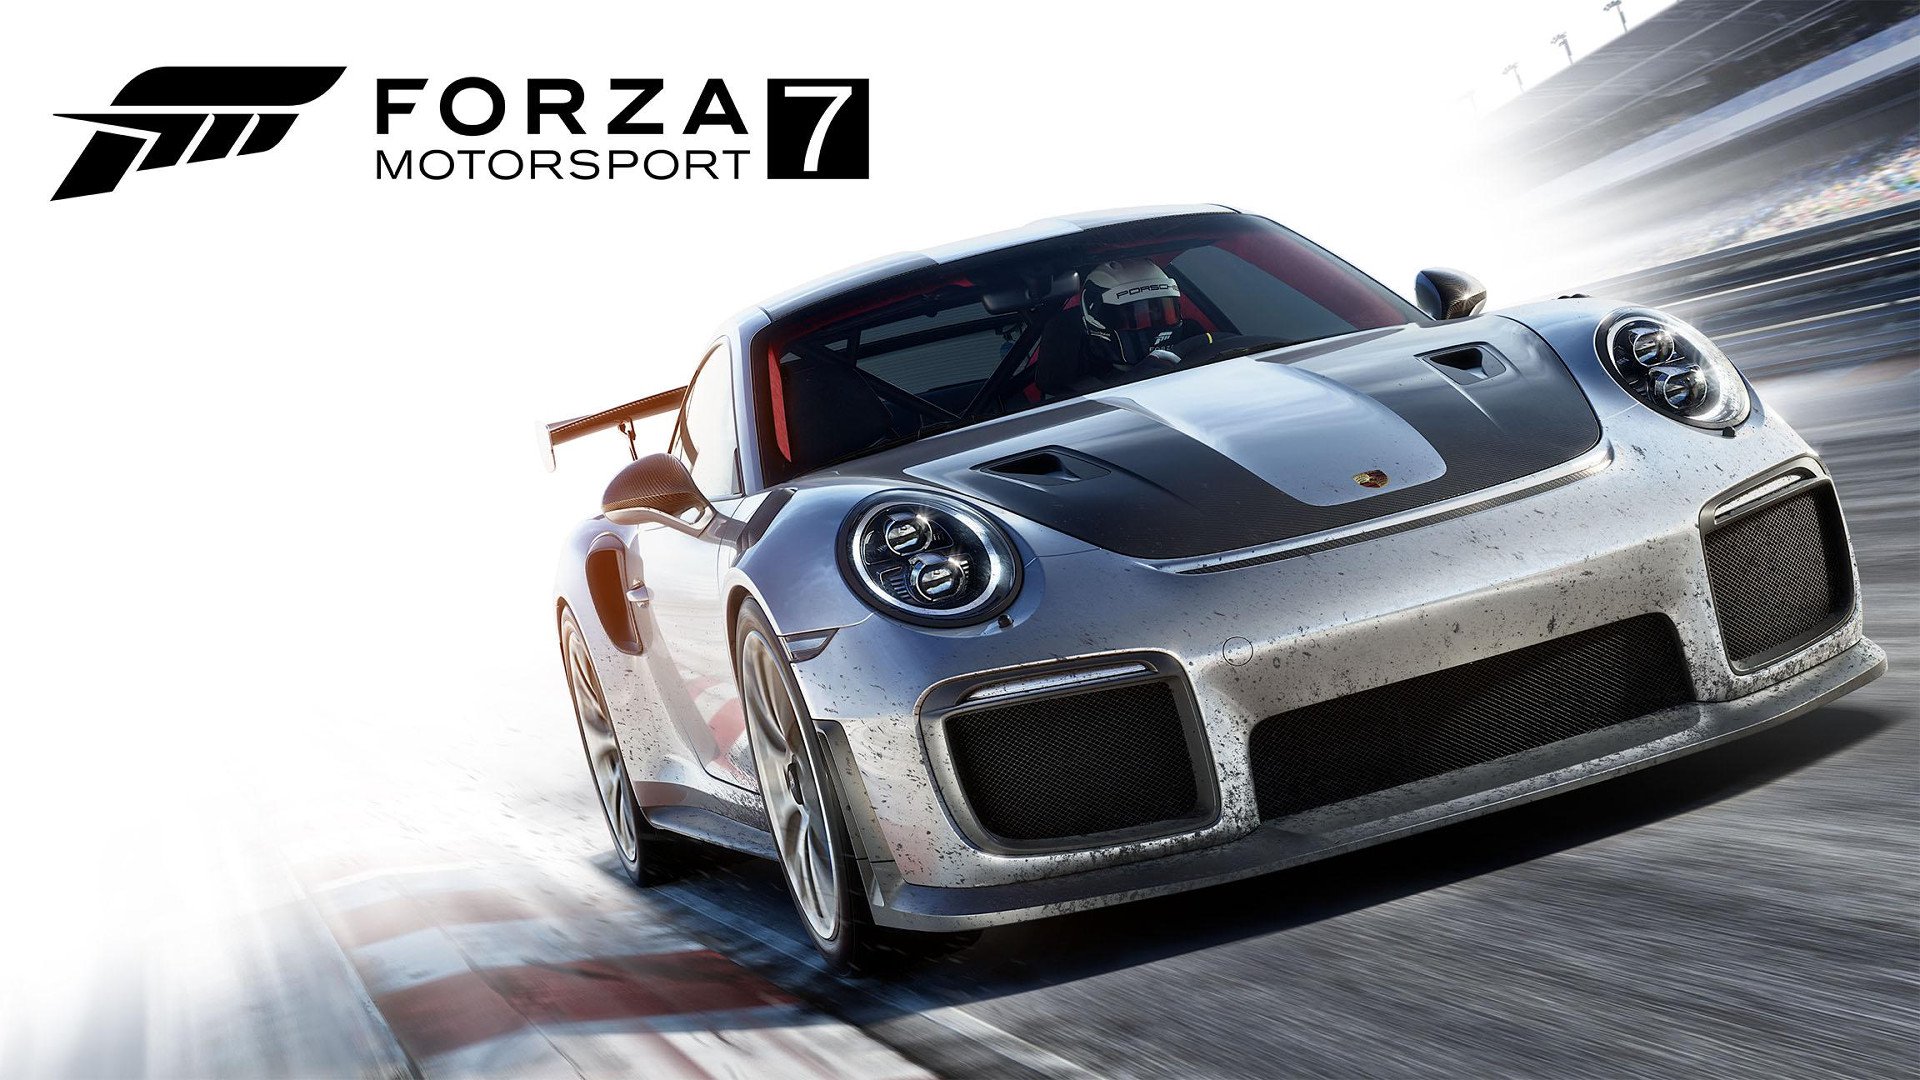 Forza Motorsport 7 Reviews, Pros and Cons